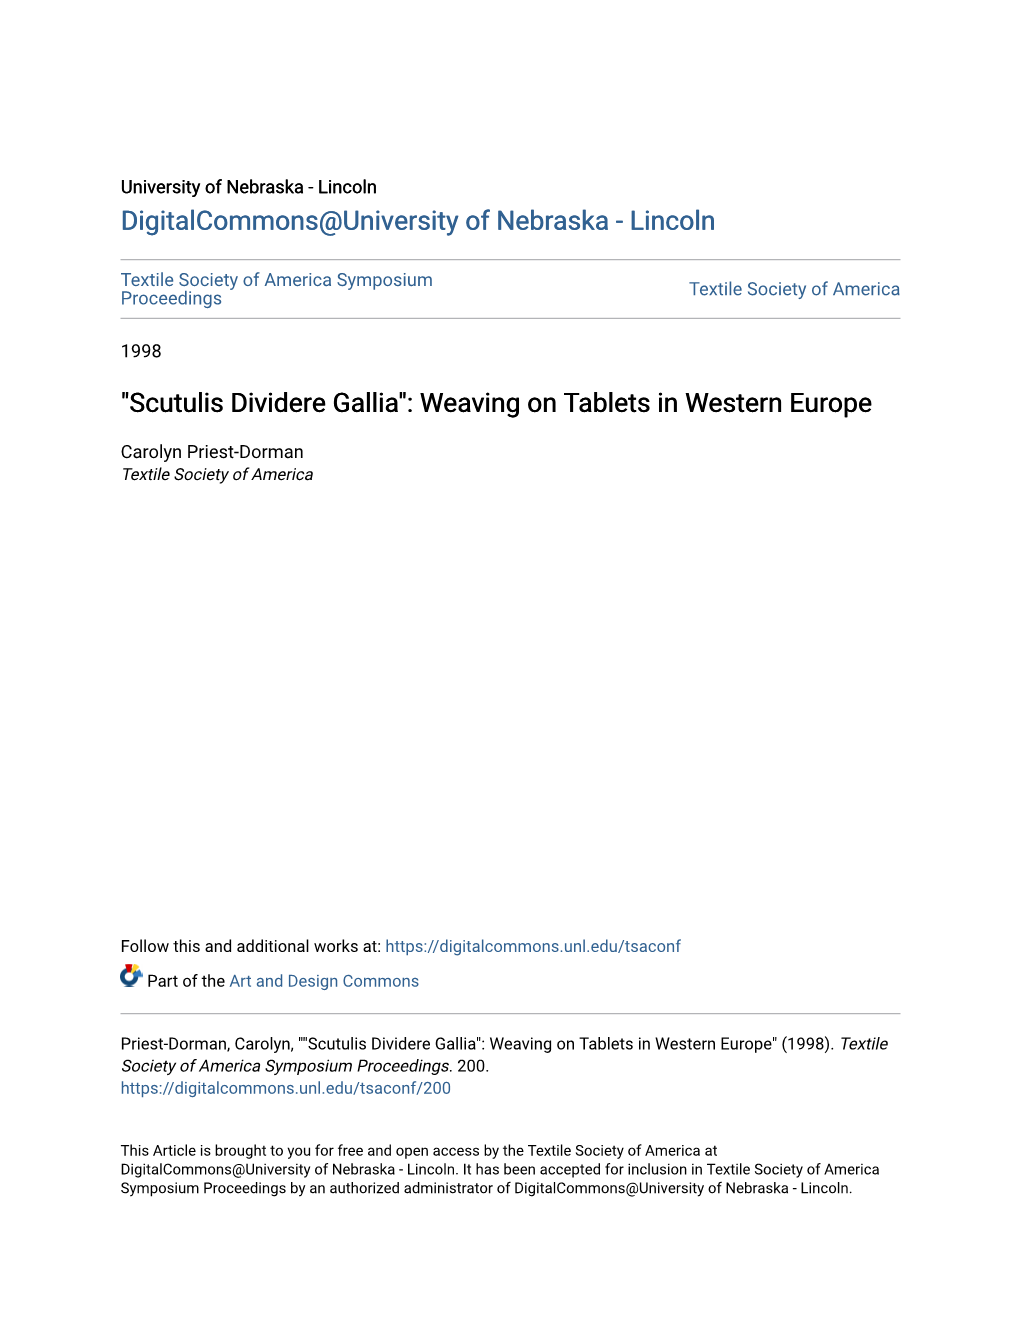 "Scutulis Dividere Gallia": Weaving on Tablets in Western Europe